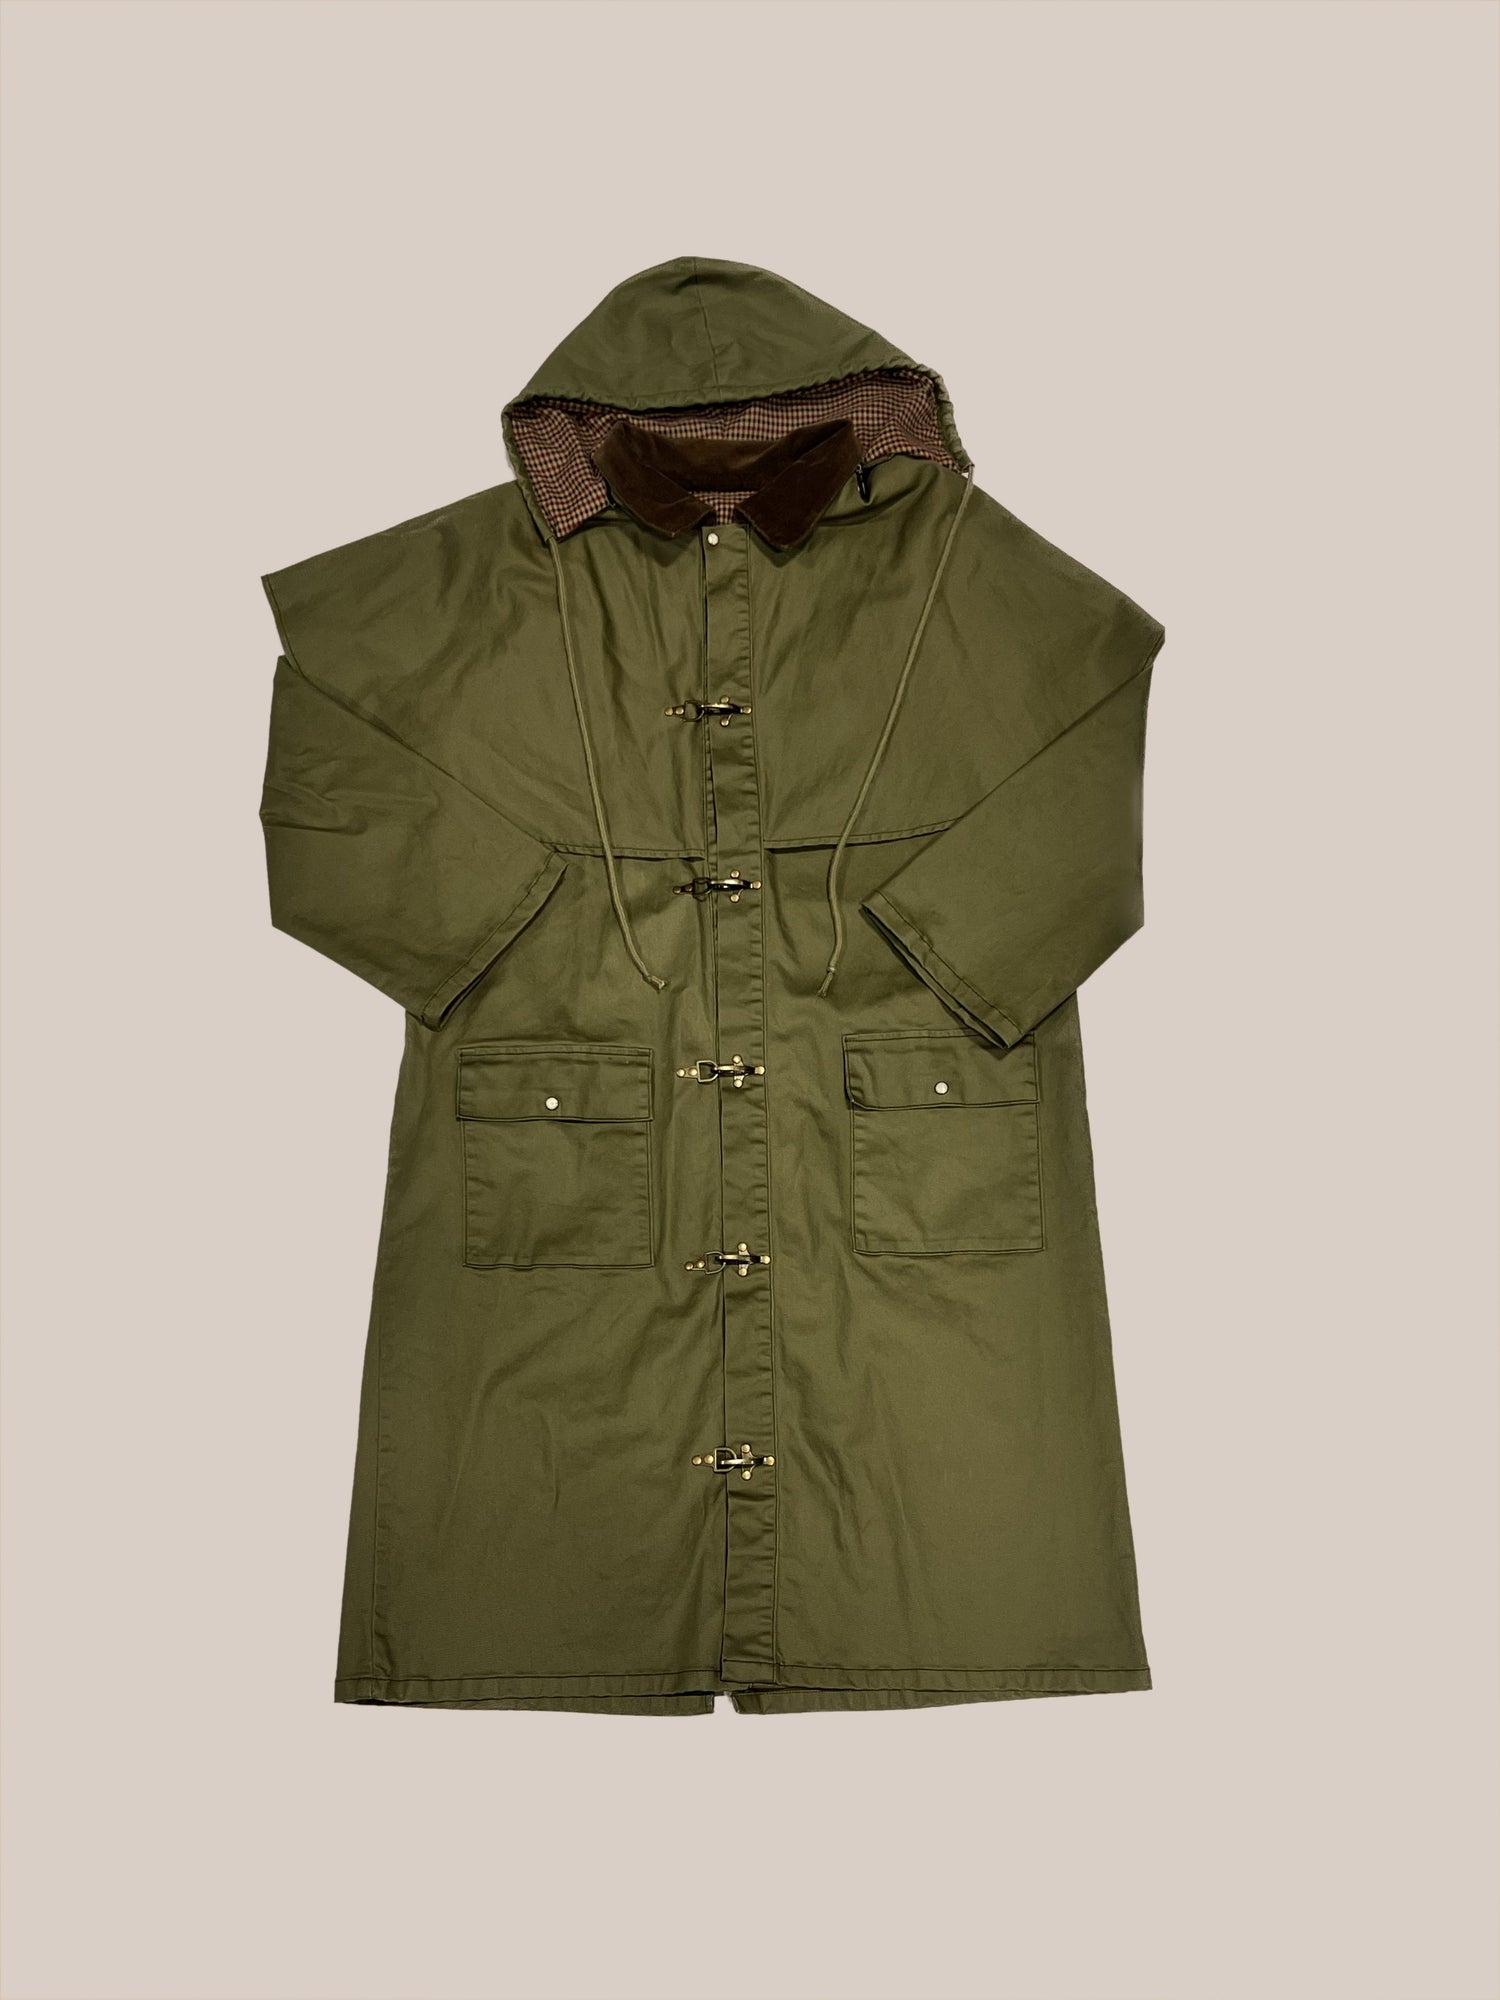 Heavy garment: Olive green, waxed cotton long coat with hood and large pockets displayed on a neutral background by Profound.